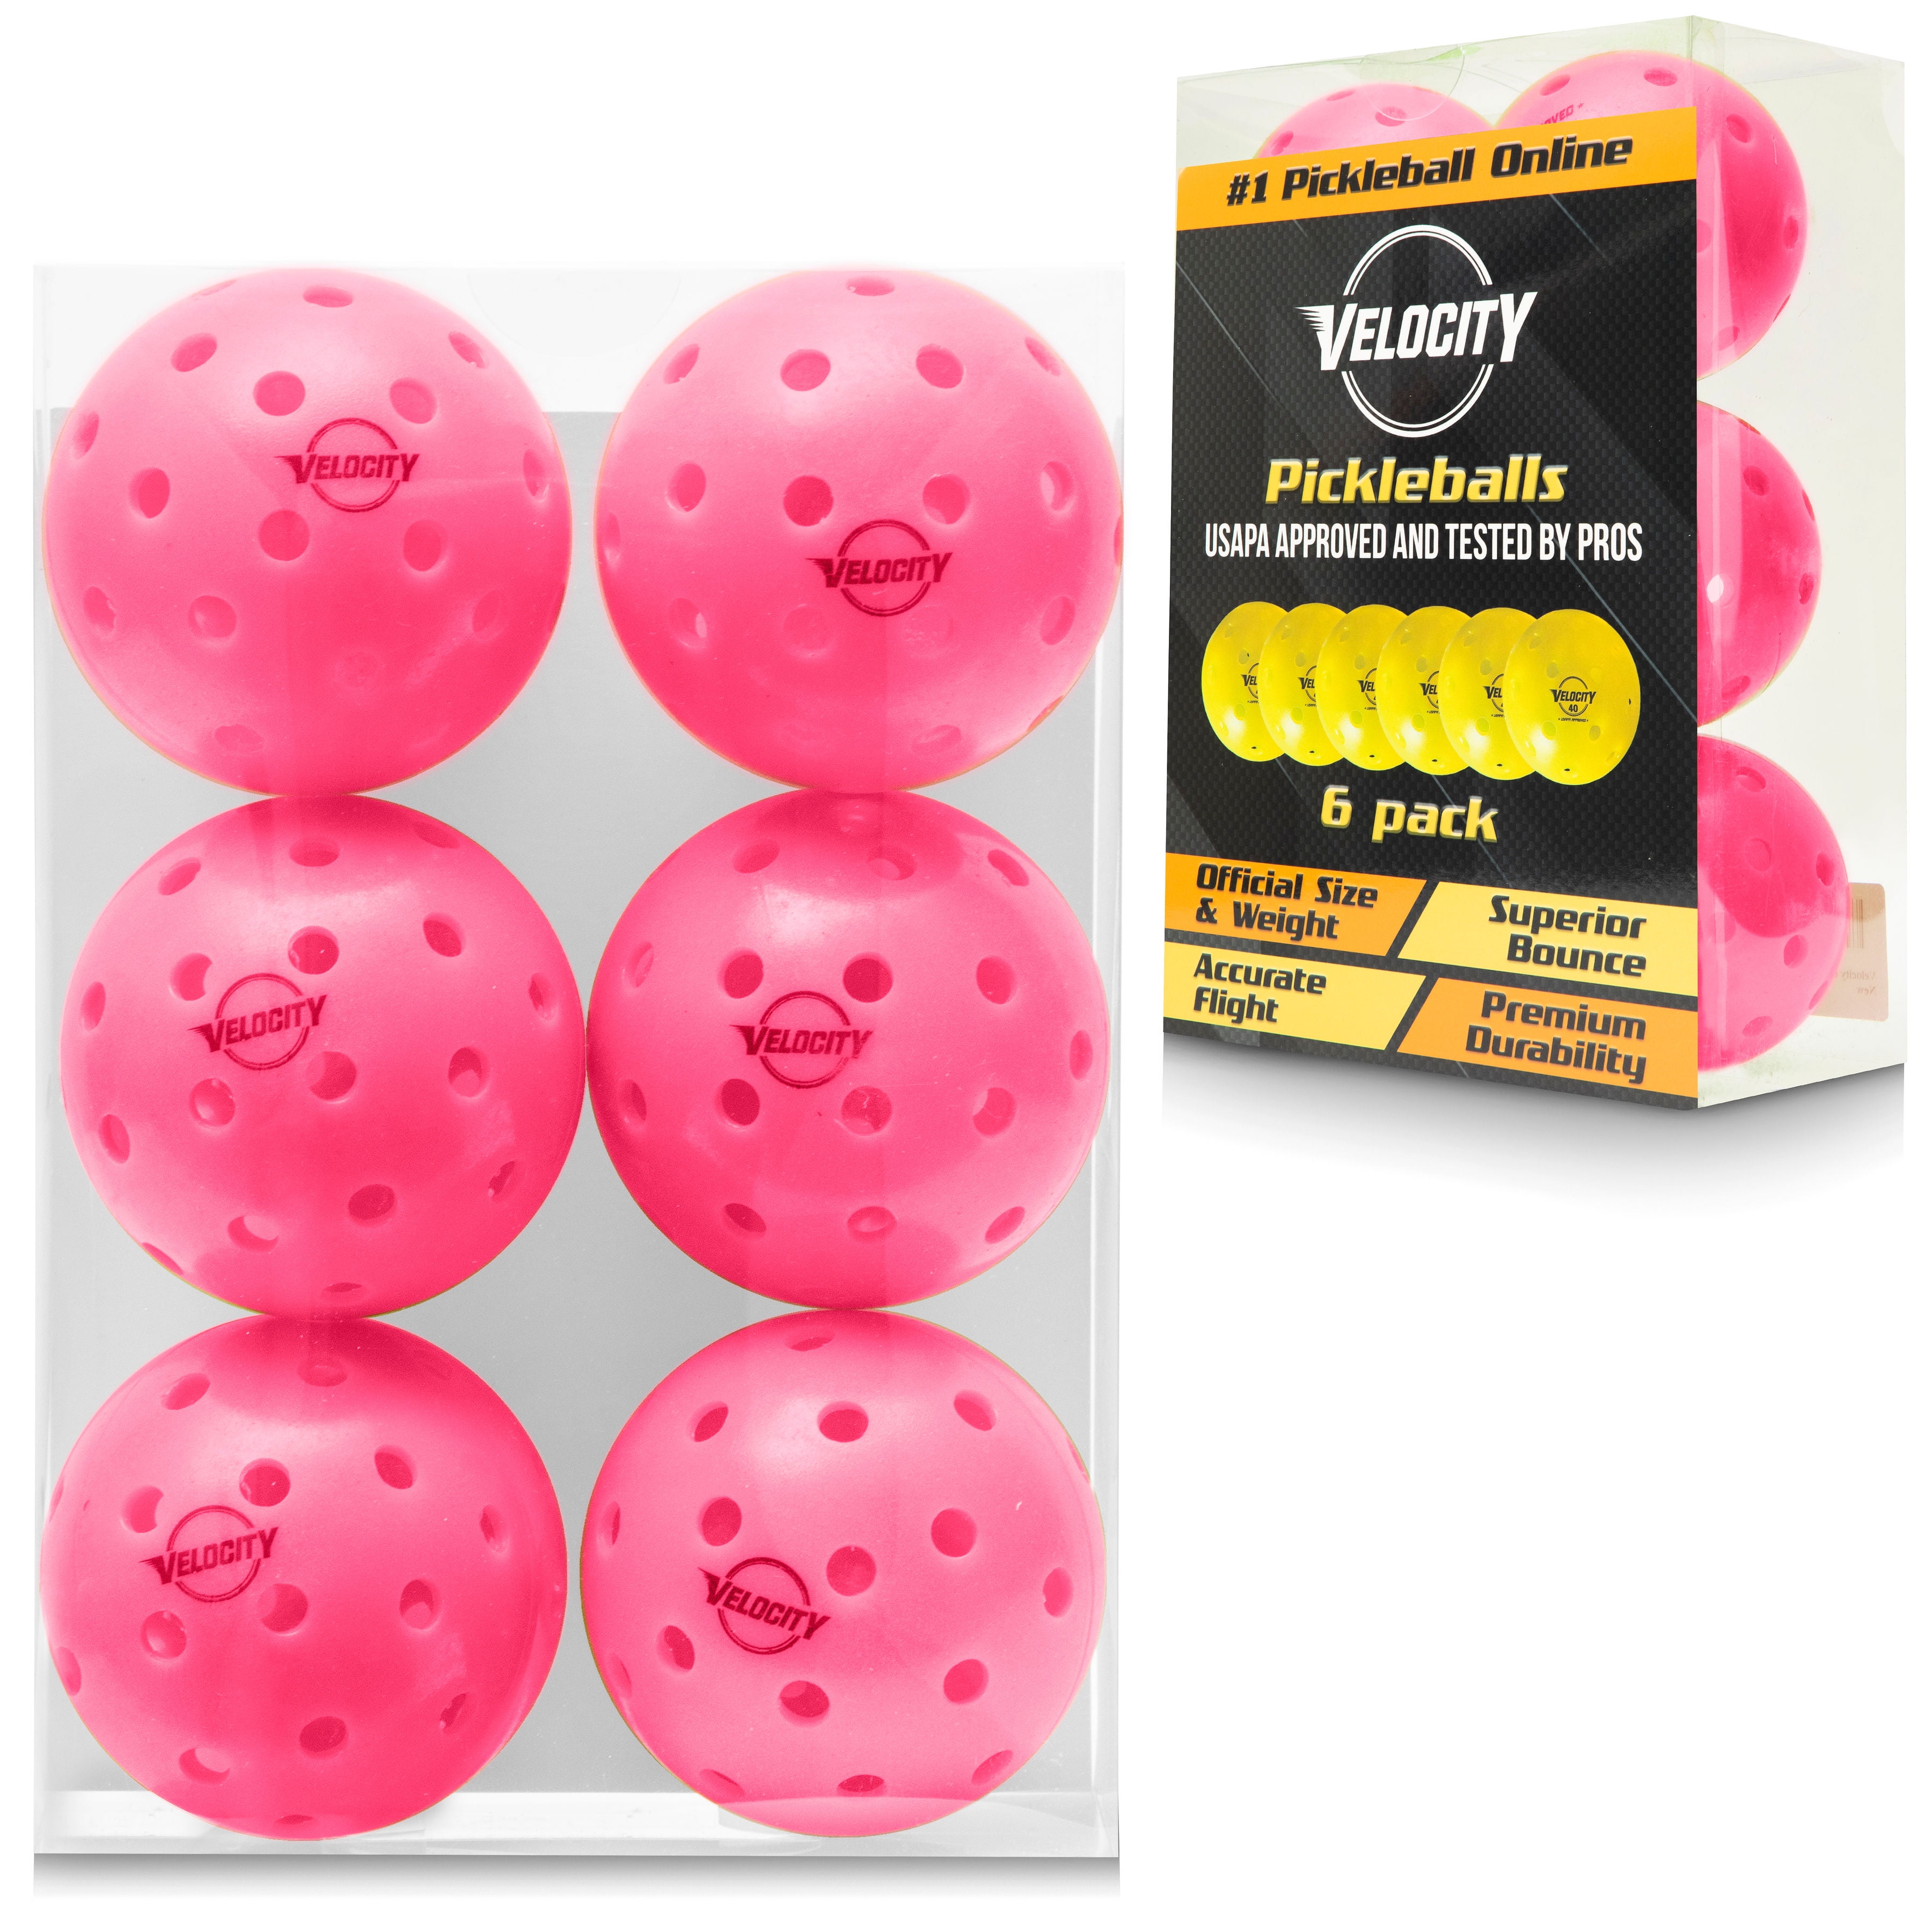 NEW Franklin X-40 Performance Outdoor Pickleballs USAPA Approved 6 pak Optic 